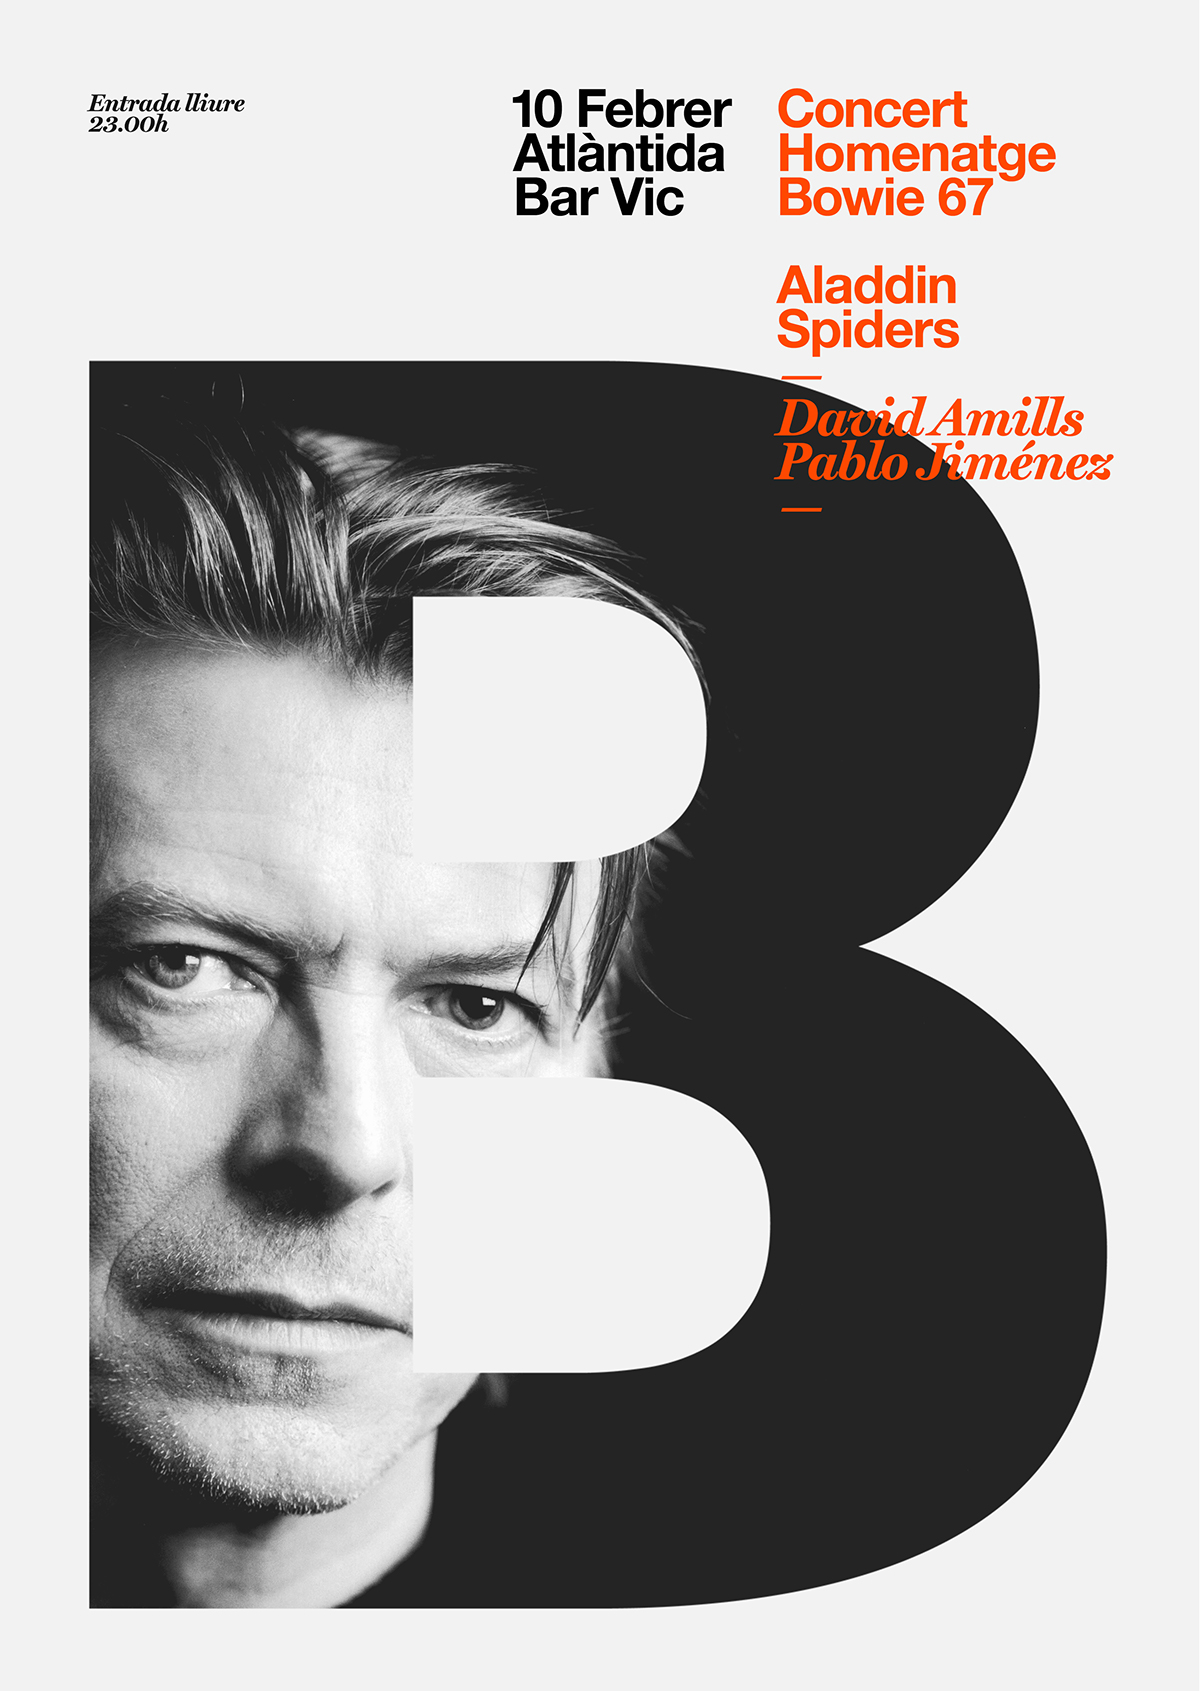 Swiss-Style-David-Bowie-Poster-by-Quim-Marin